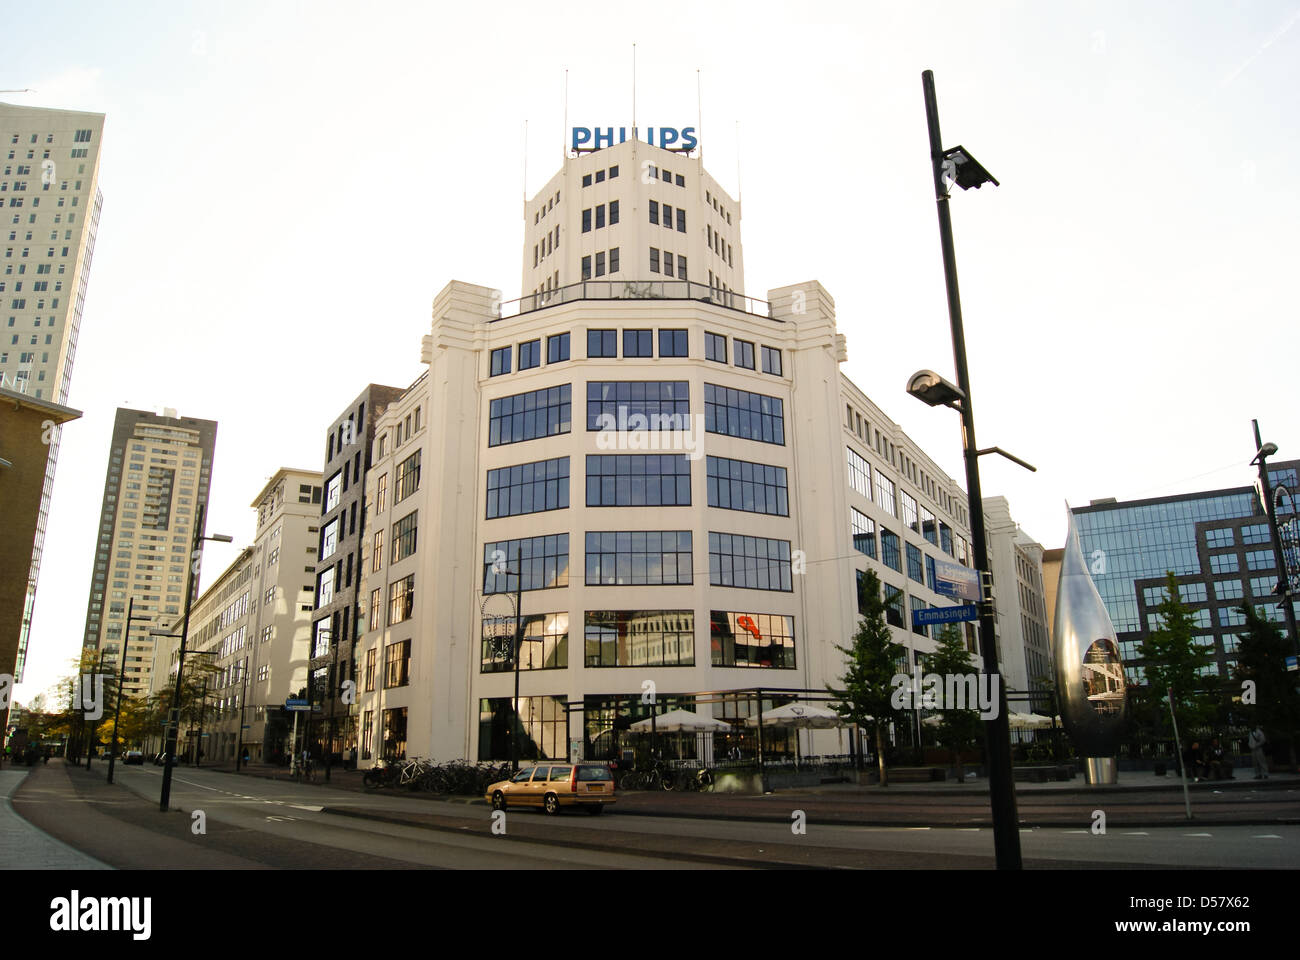 Philips building in Eindhoven, Netherlands. Stock Photo